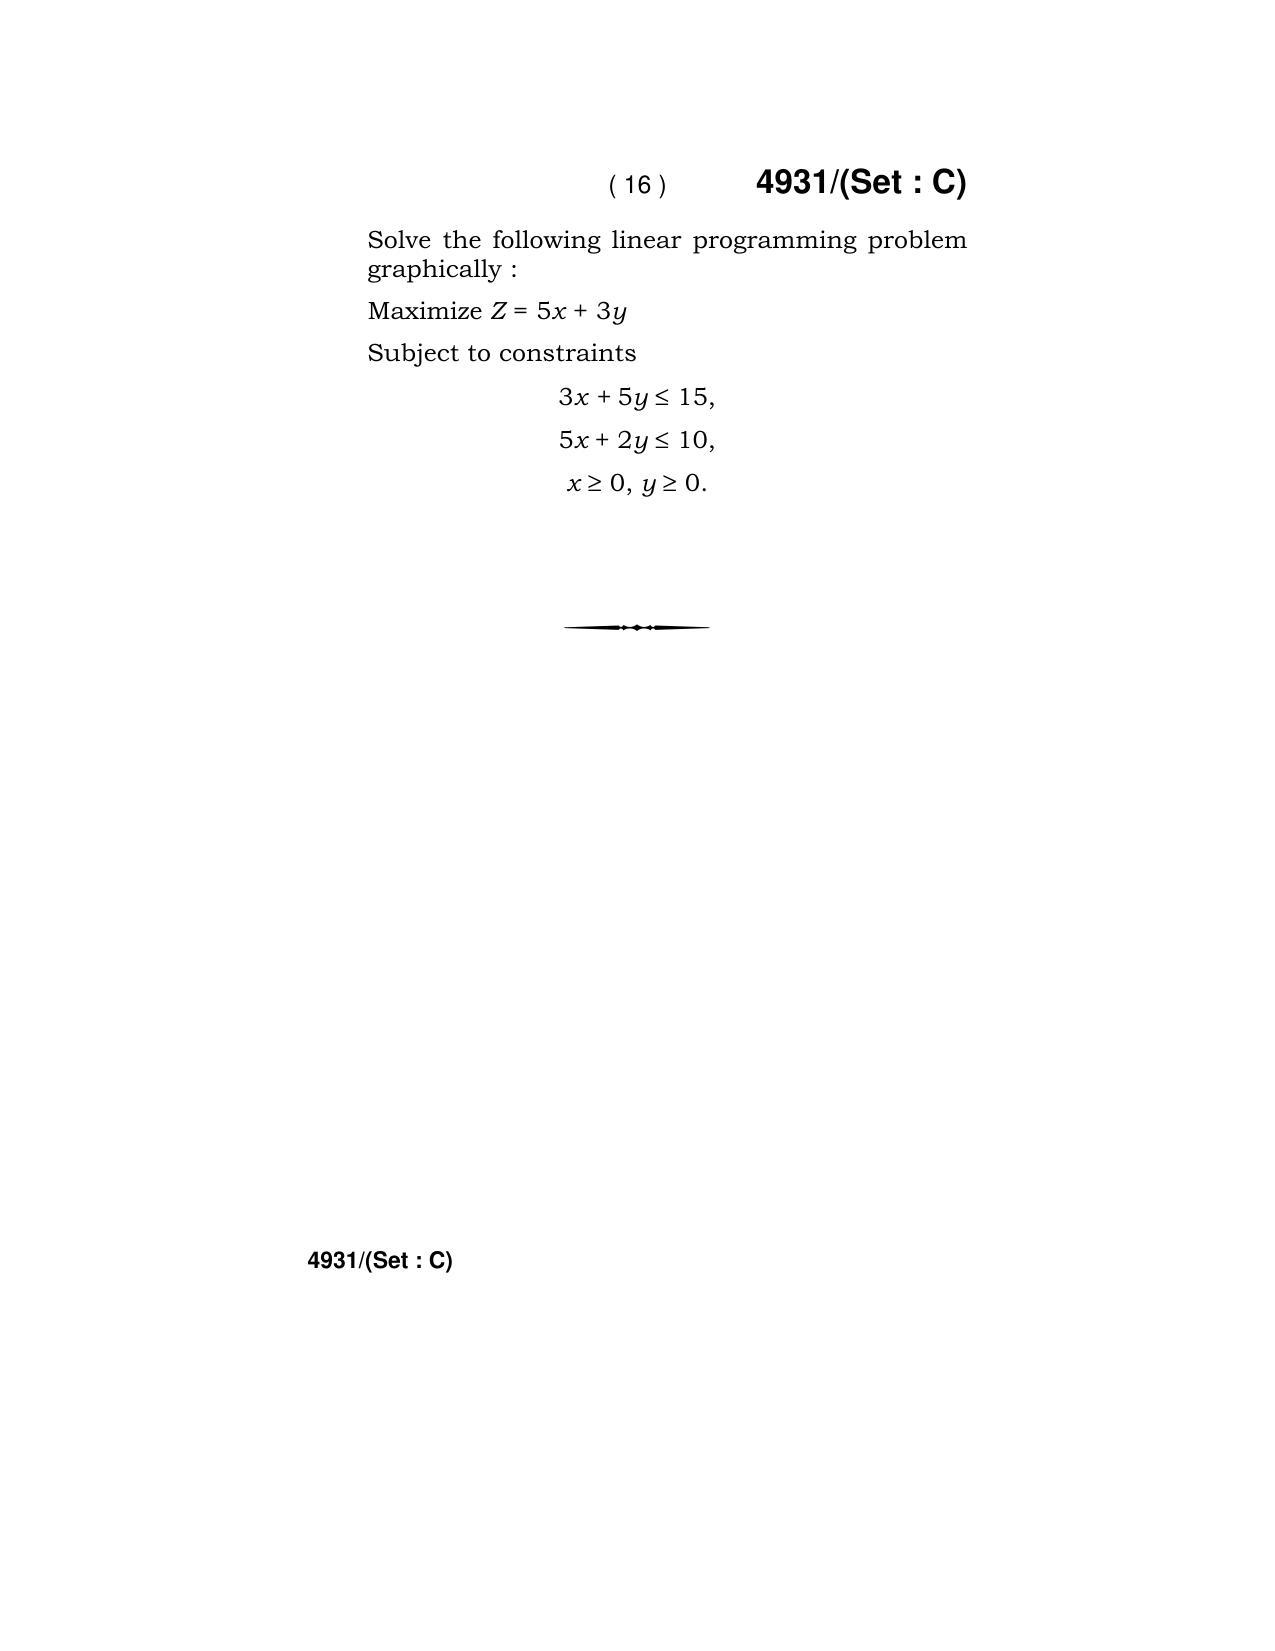 Haryana Board HBSE Class 12 Mathematics 2020 Question Paper - Page 48